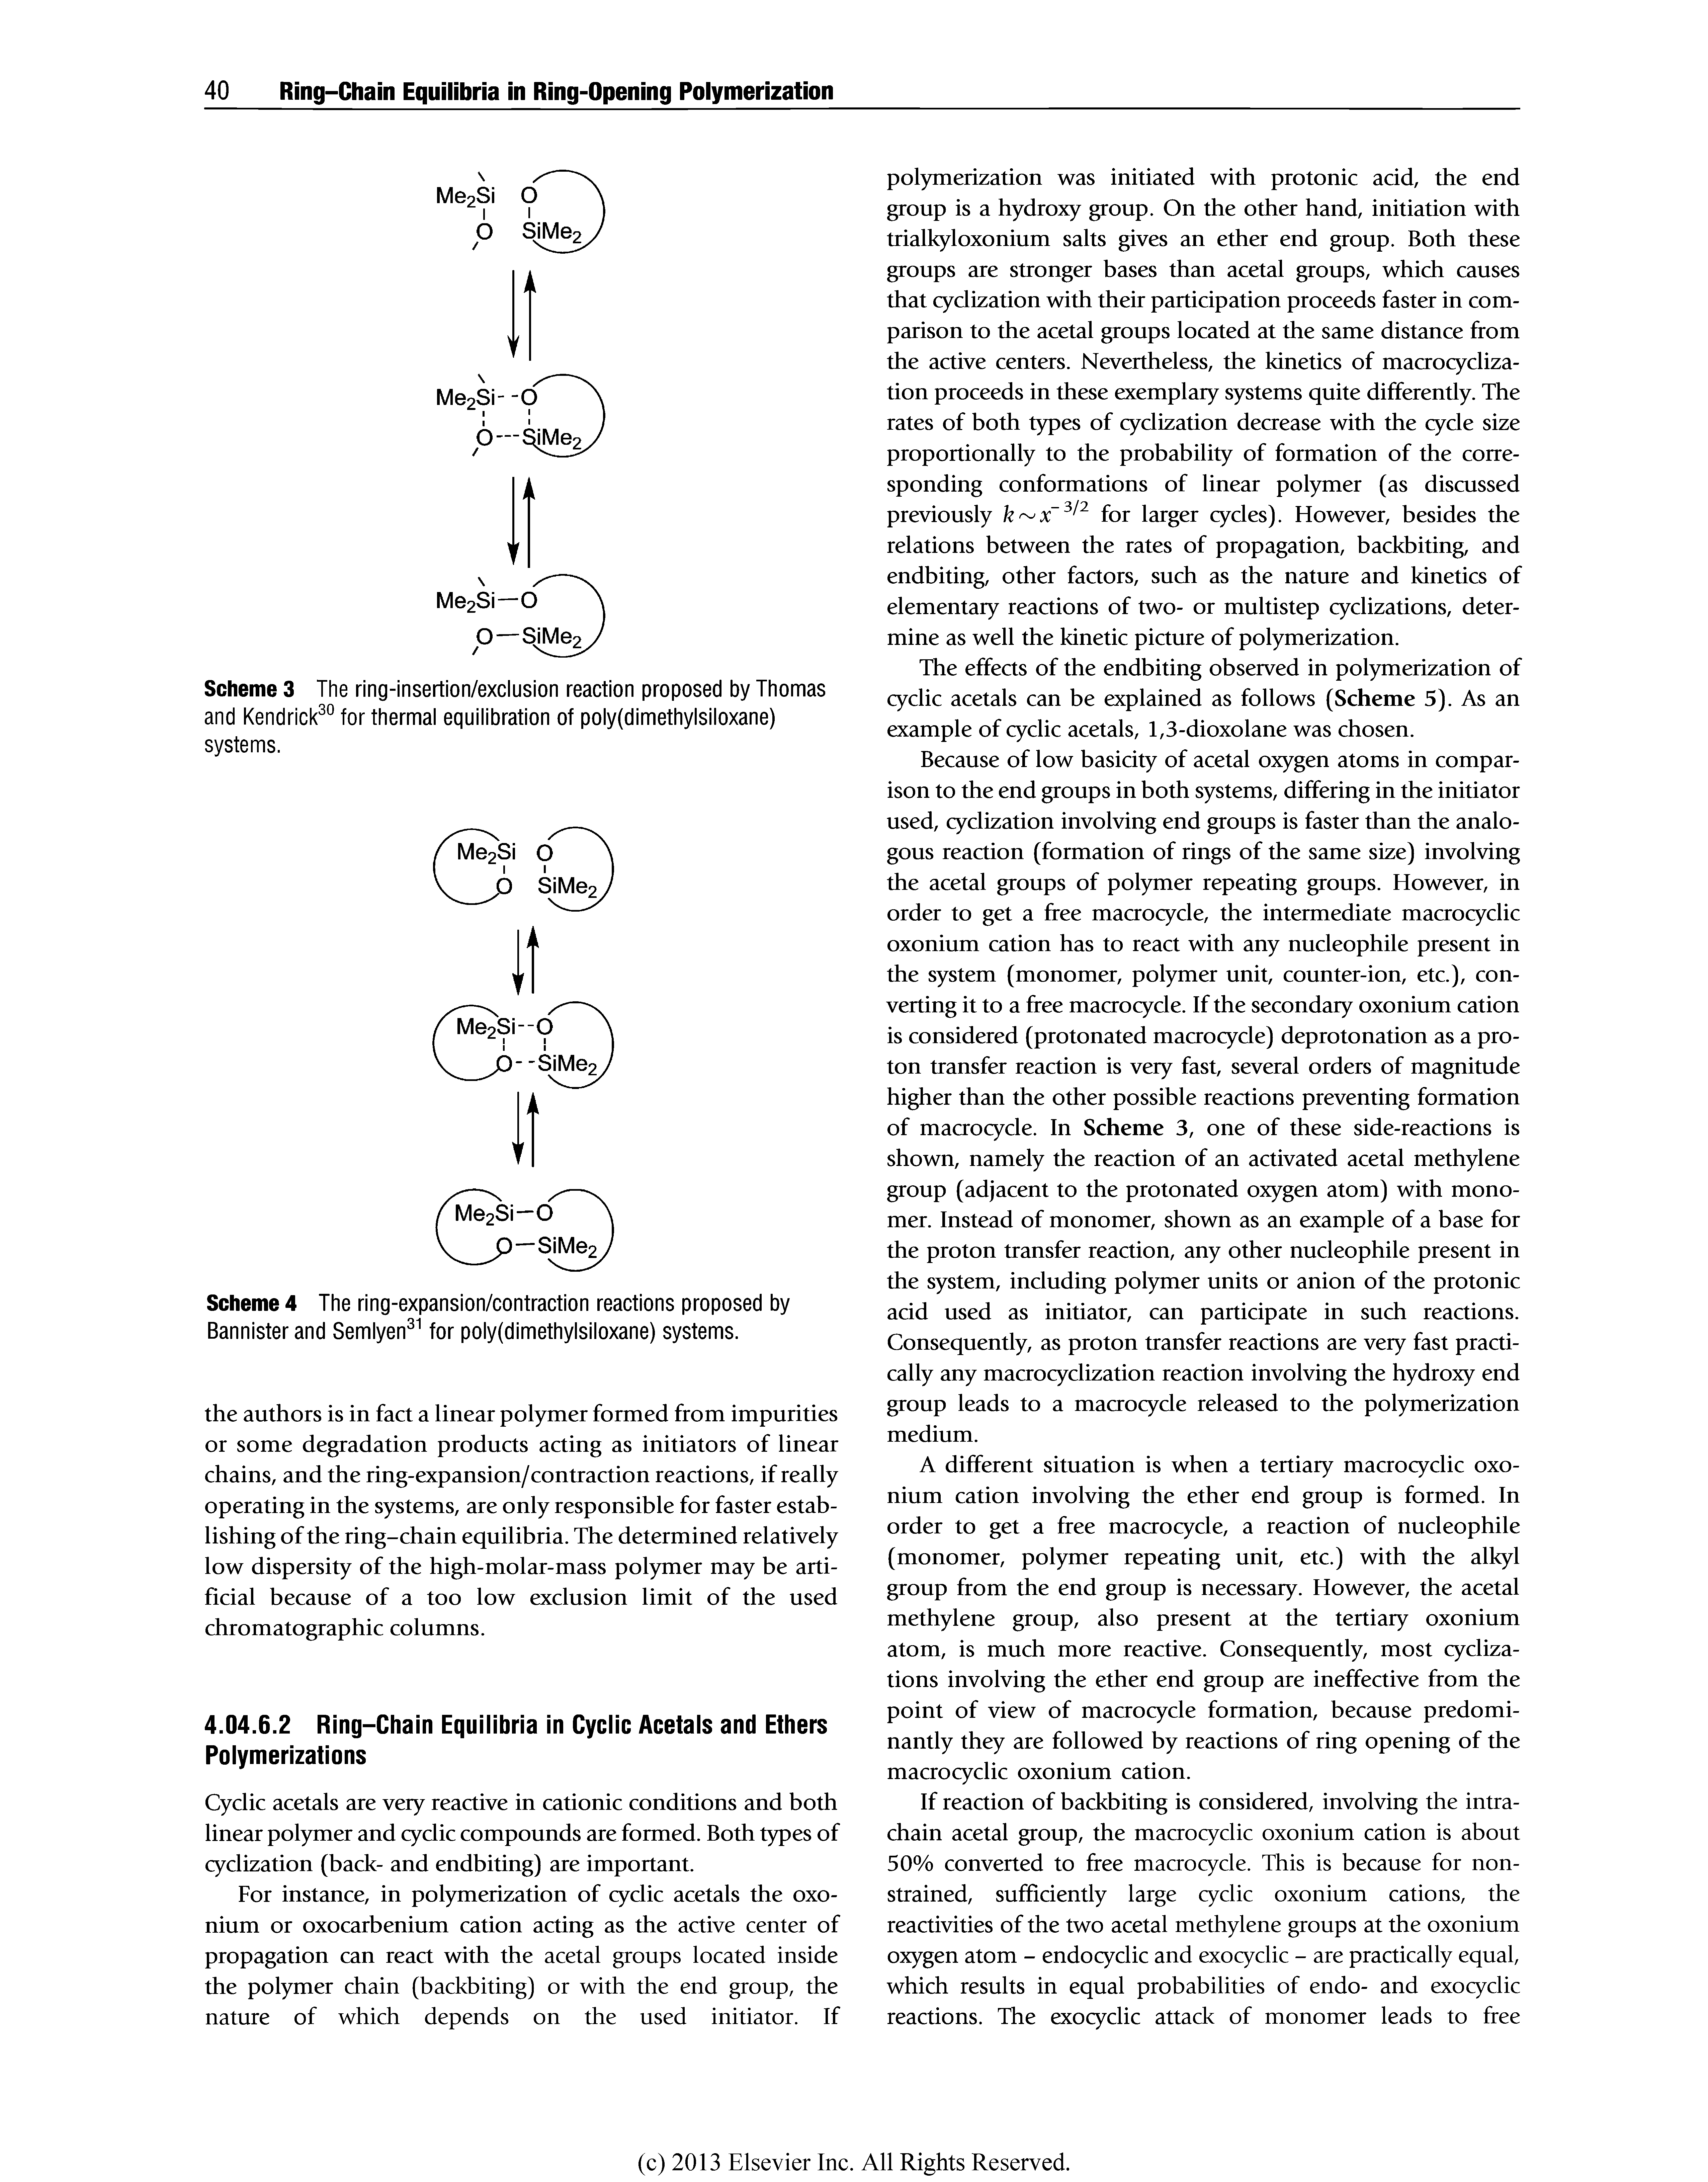 Scheme 4 The ring-expansion/contraction reactions proposed by Bannister and Semlyen for poly(dimethylsiloxane) systems.